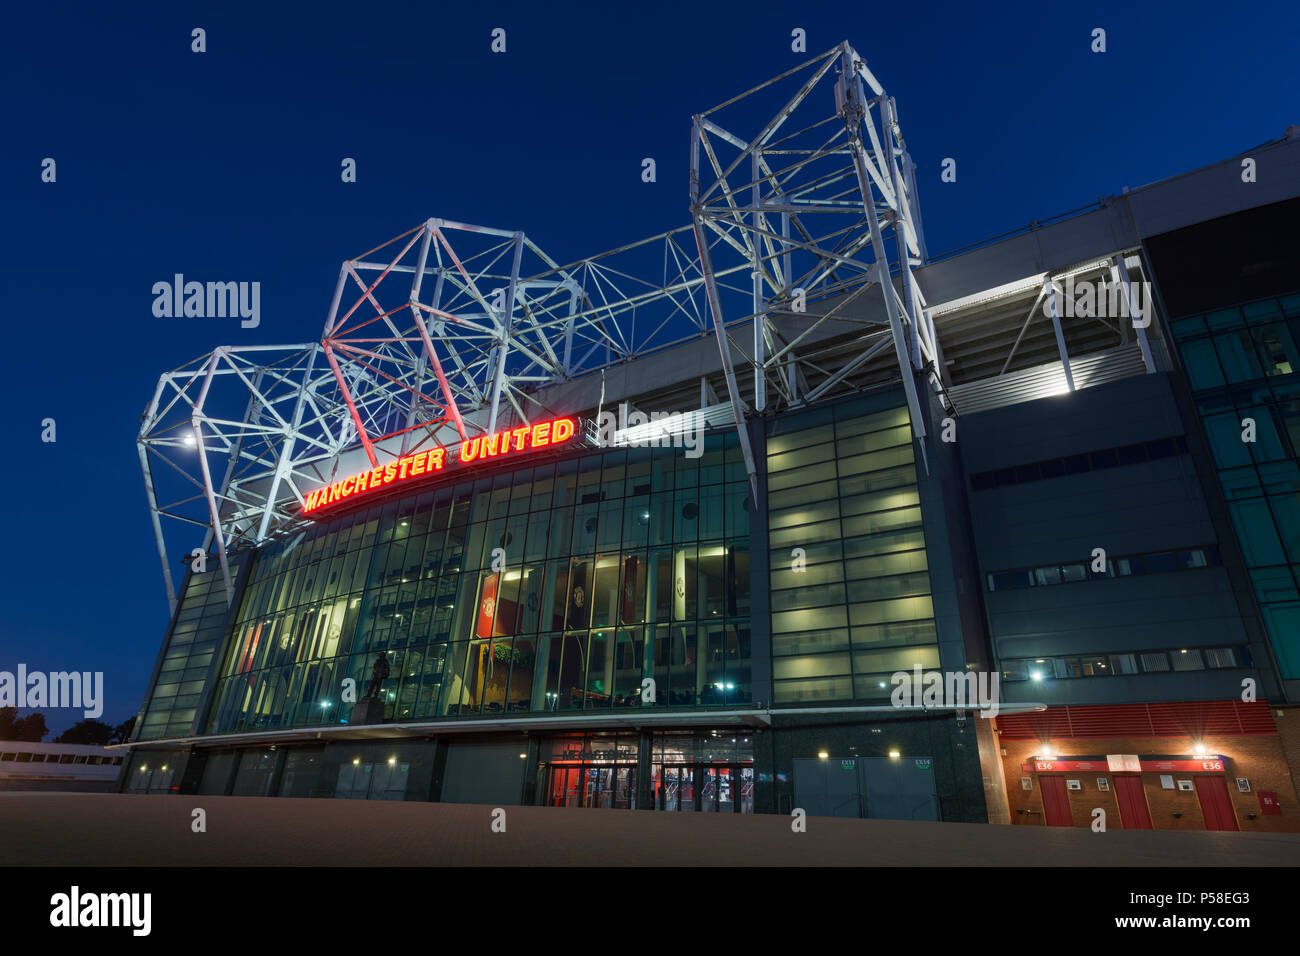 Old Trafford stadium, home of Manchester United Football Club, during a summer's evening (Editorial use only). Stock Photo